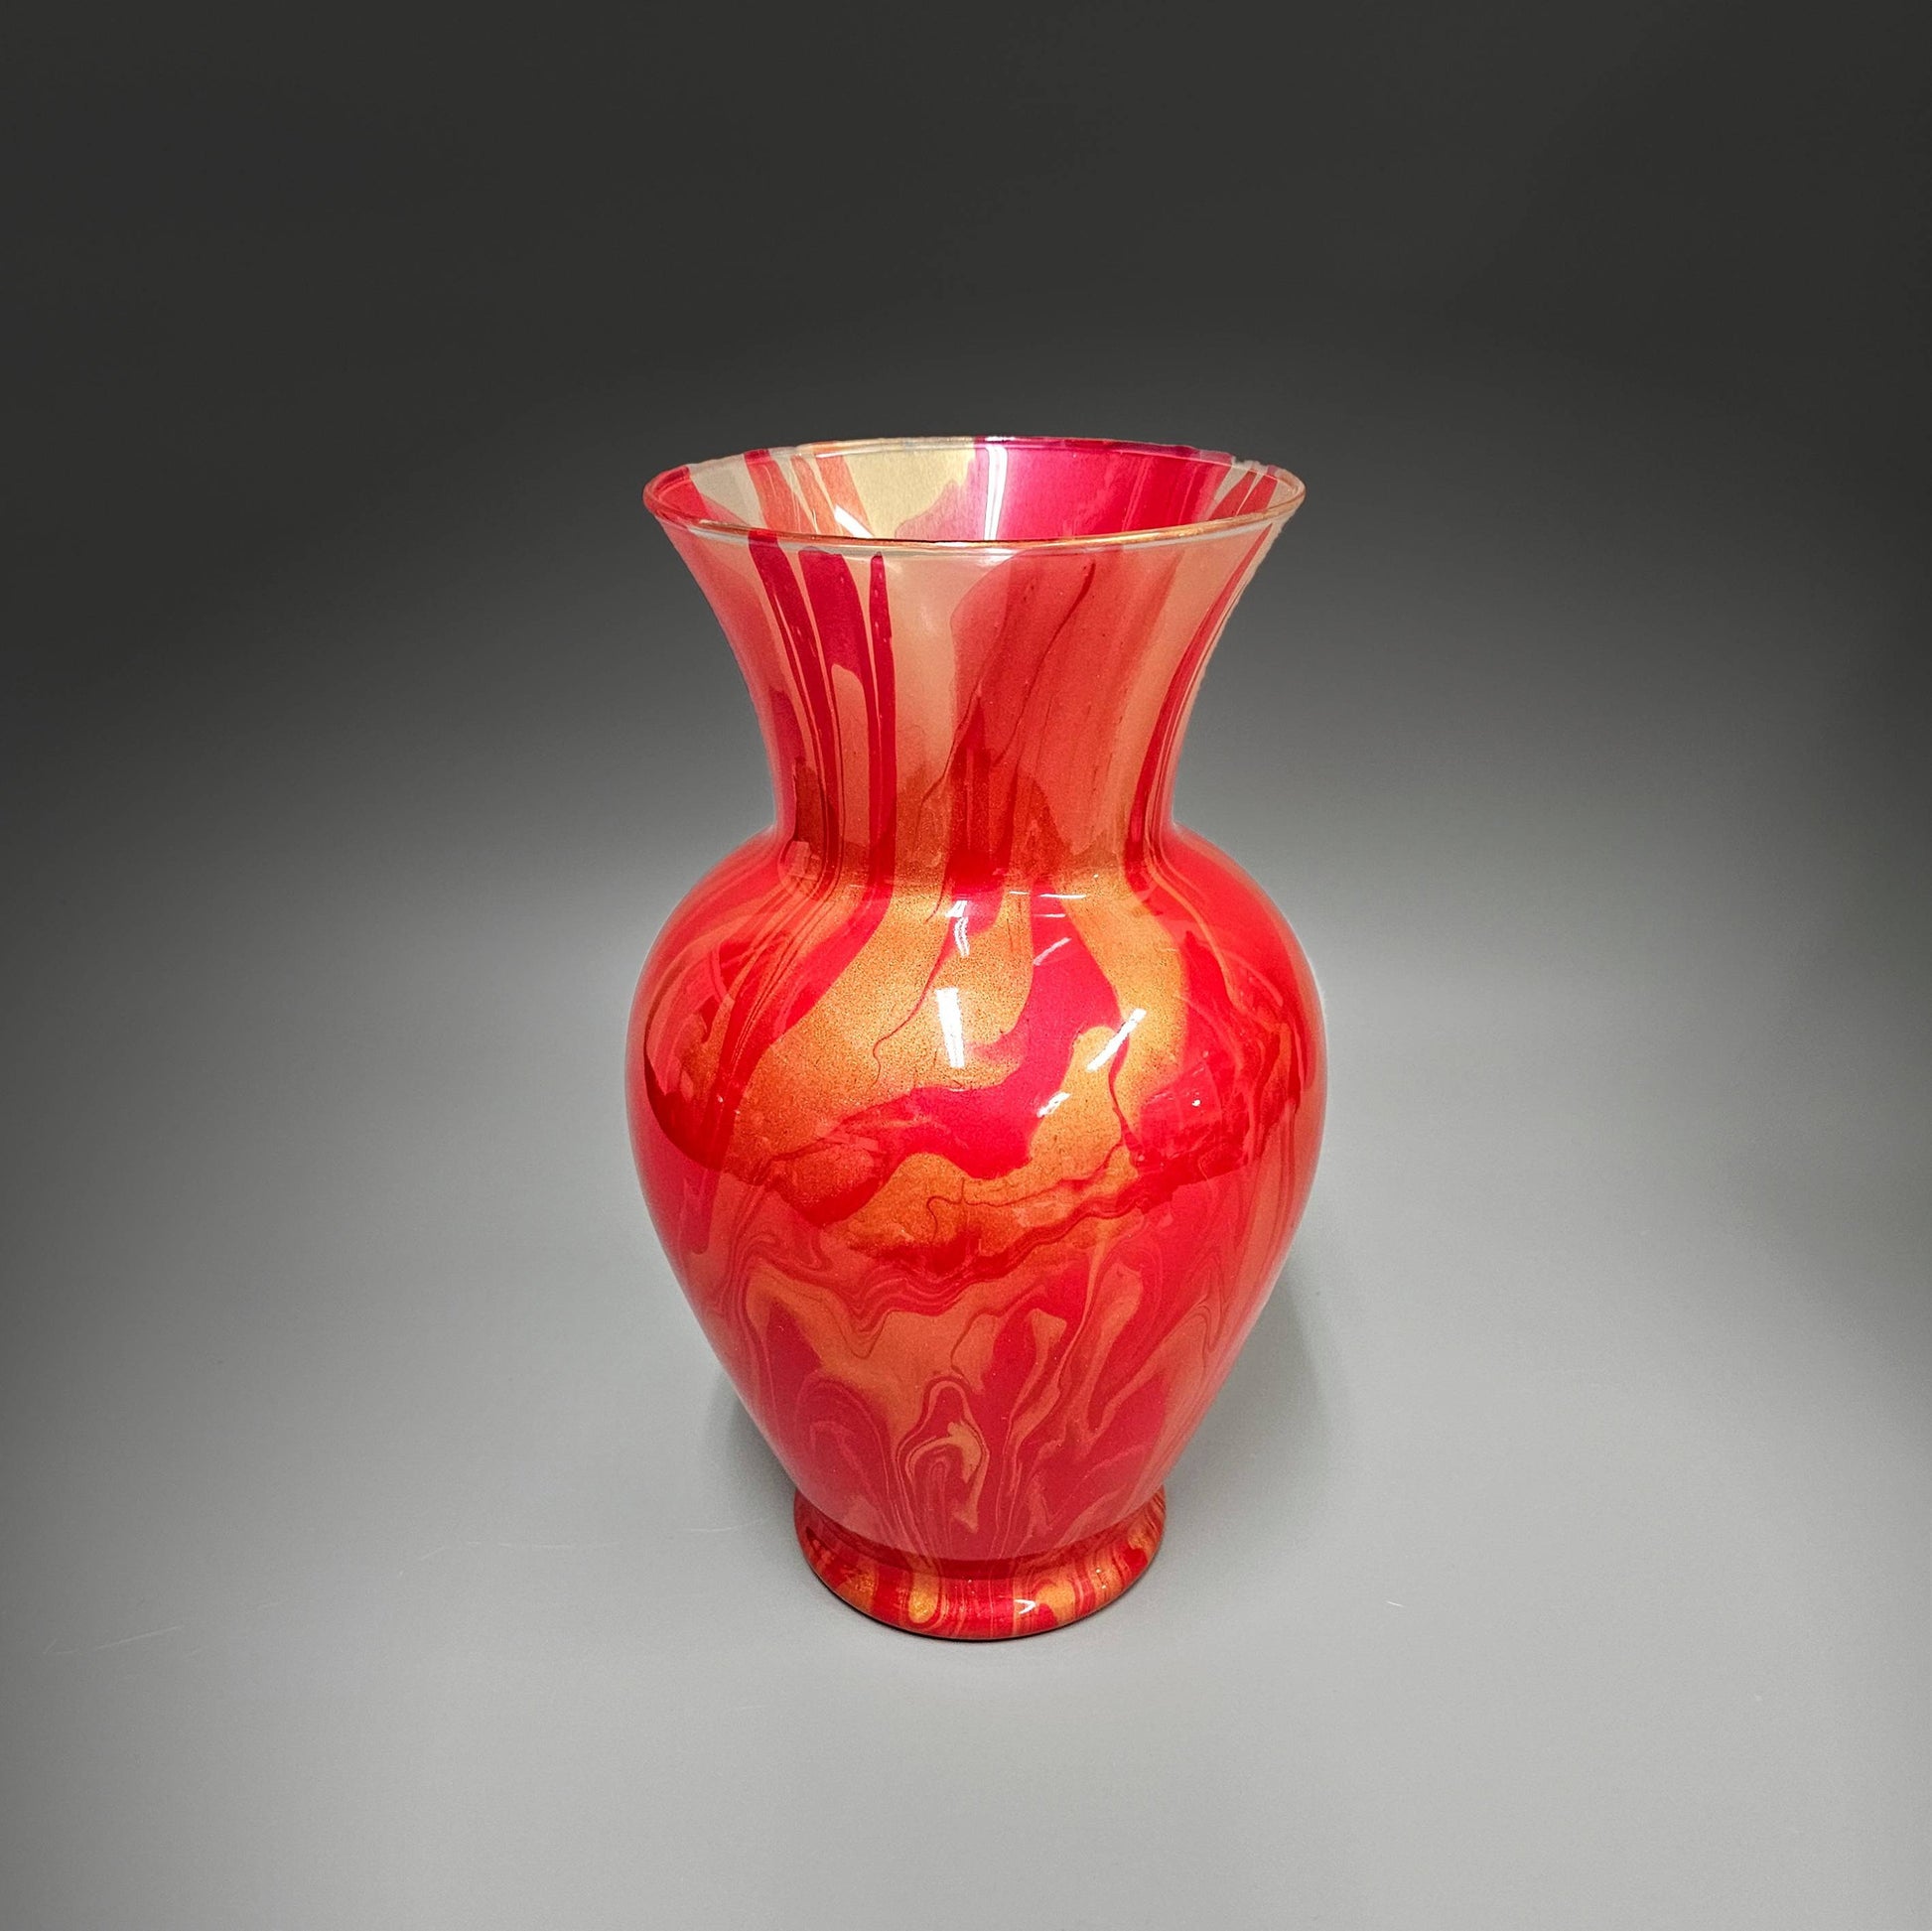 Red and Gold Centerpiece Vase | Handcrafted Fluid Art Décor Gifts